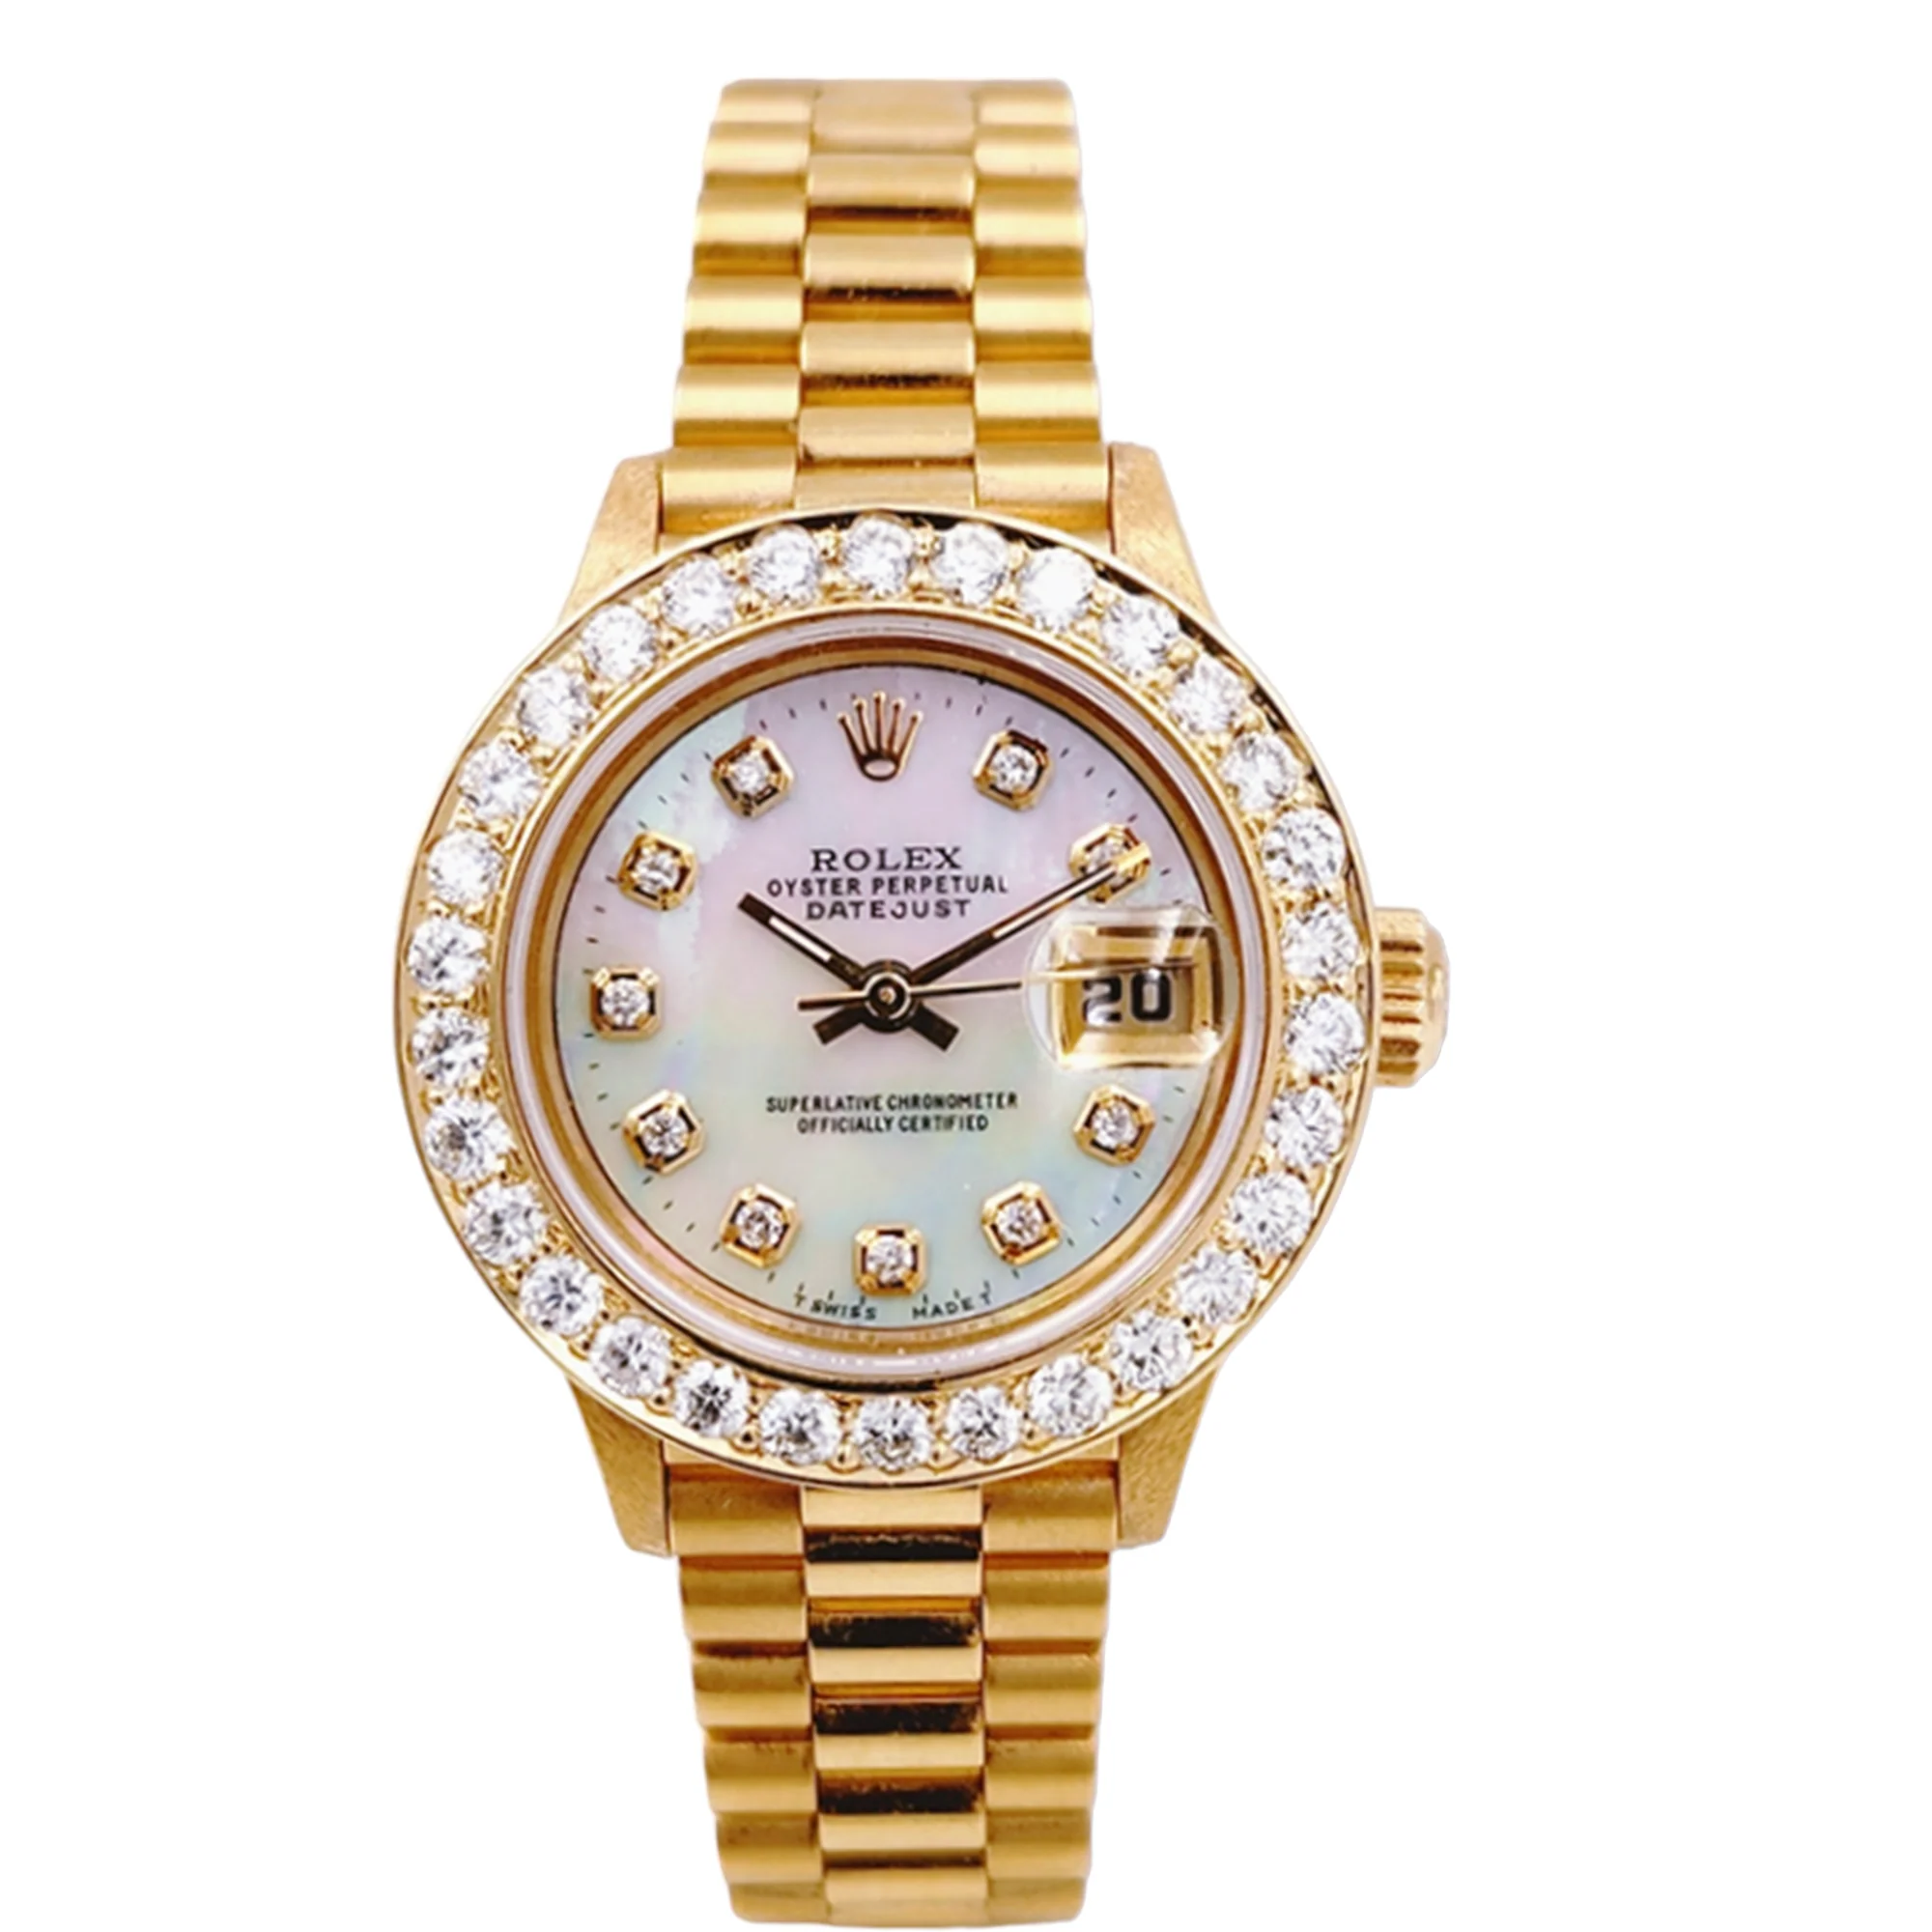 *Ladies Rolex 26mm Presidential 18K Solid Yellow Gold Watch with Mother of Pearl Diamond Dial and 2CT. Diamond Bezel. (UNWORN 69178)